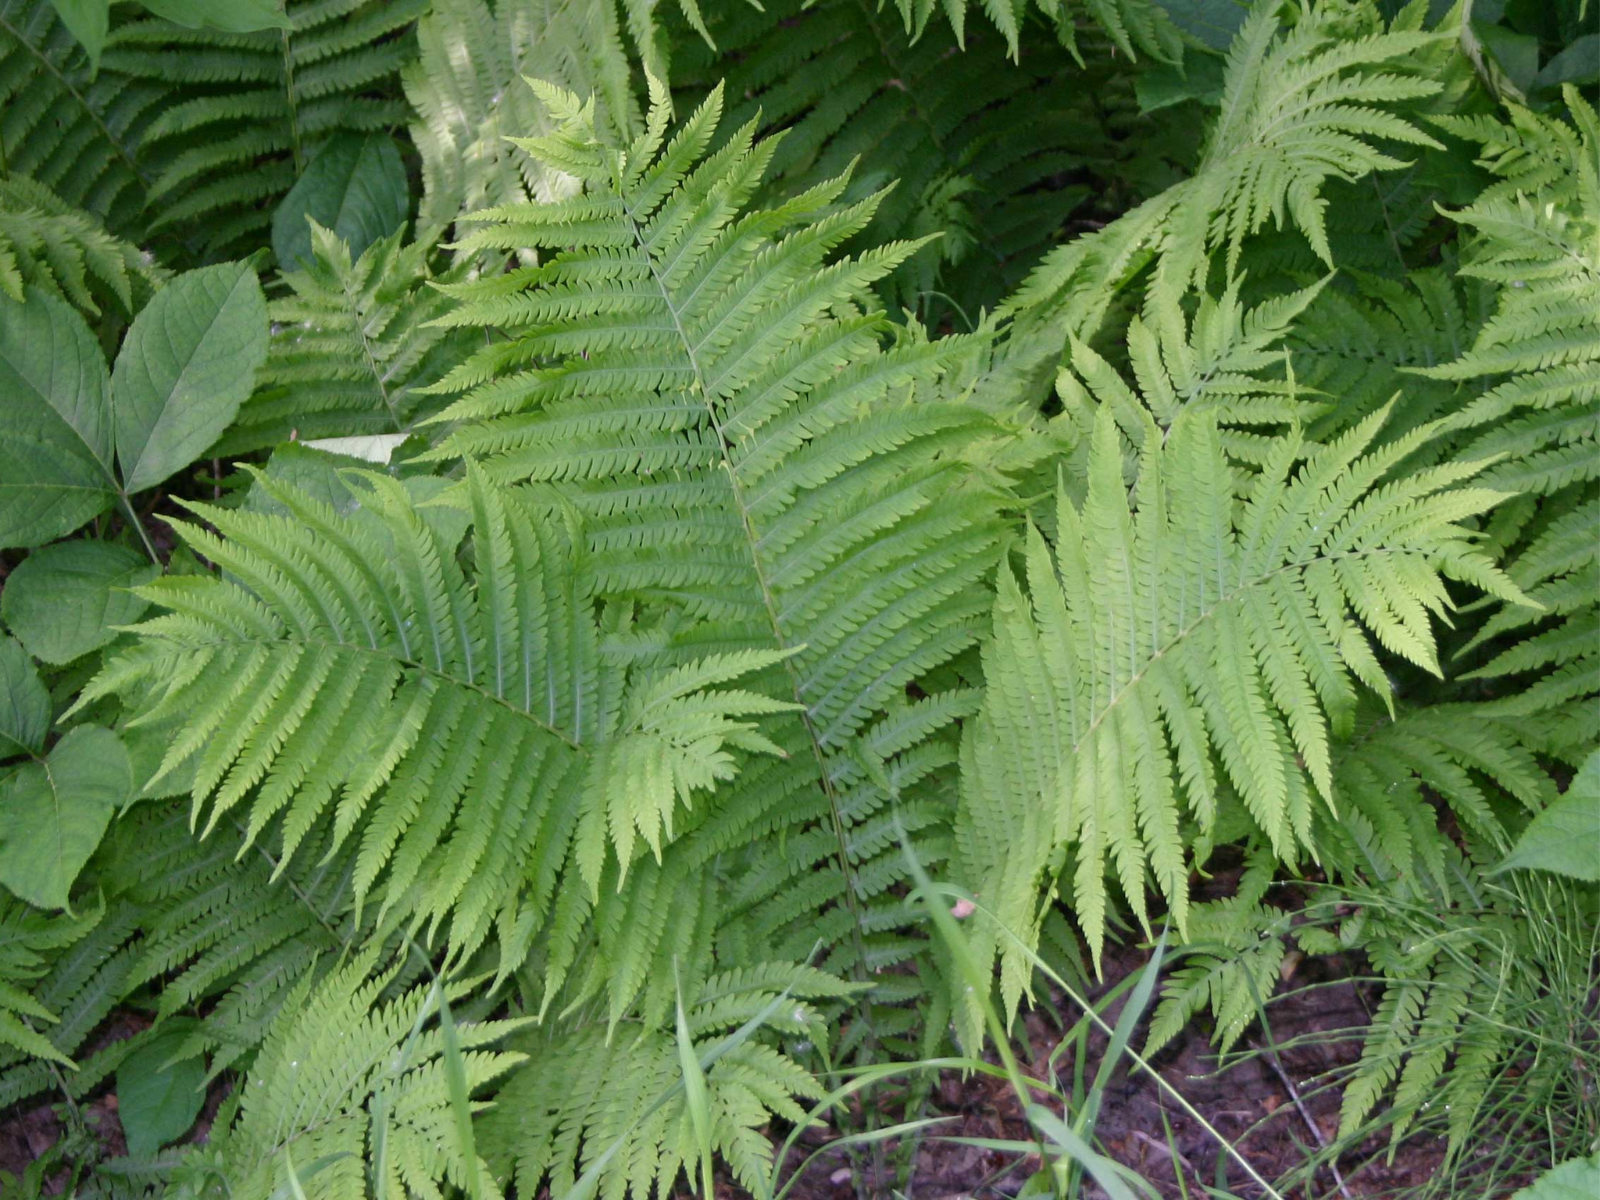 Looking down at a leafy, green fern.